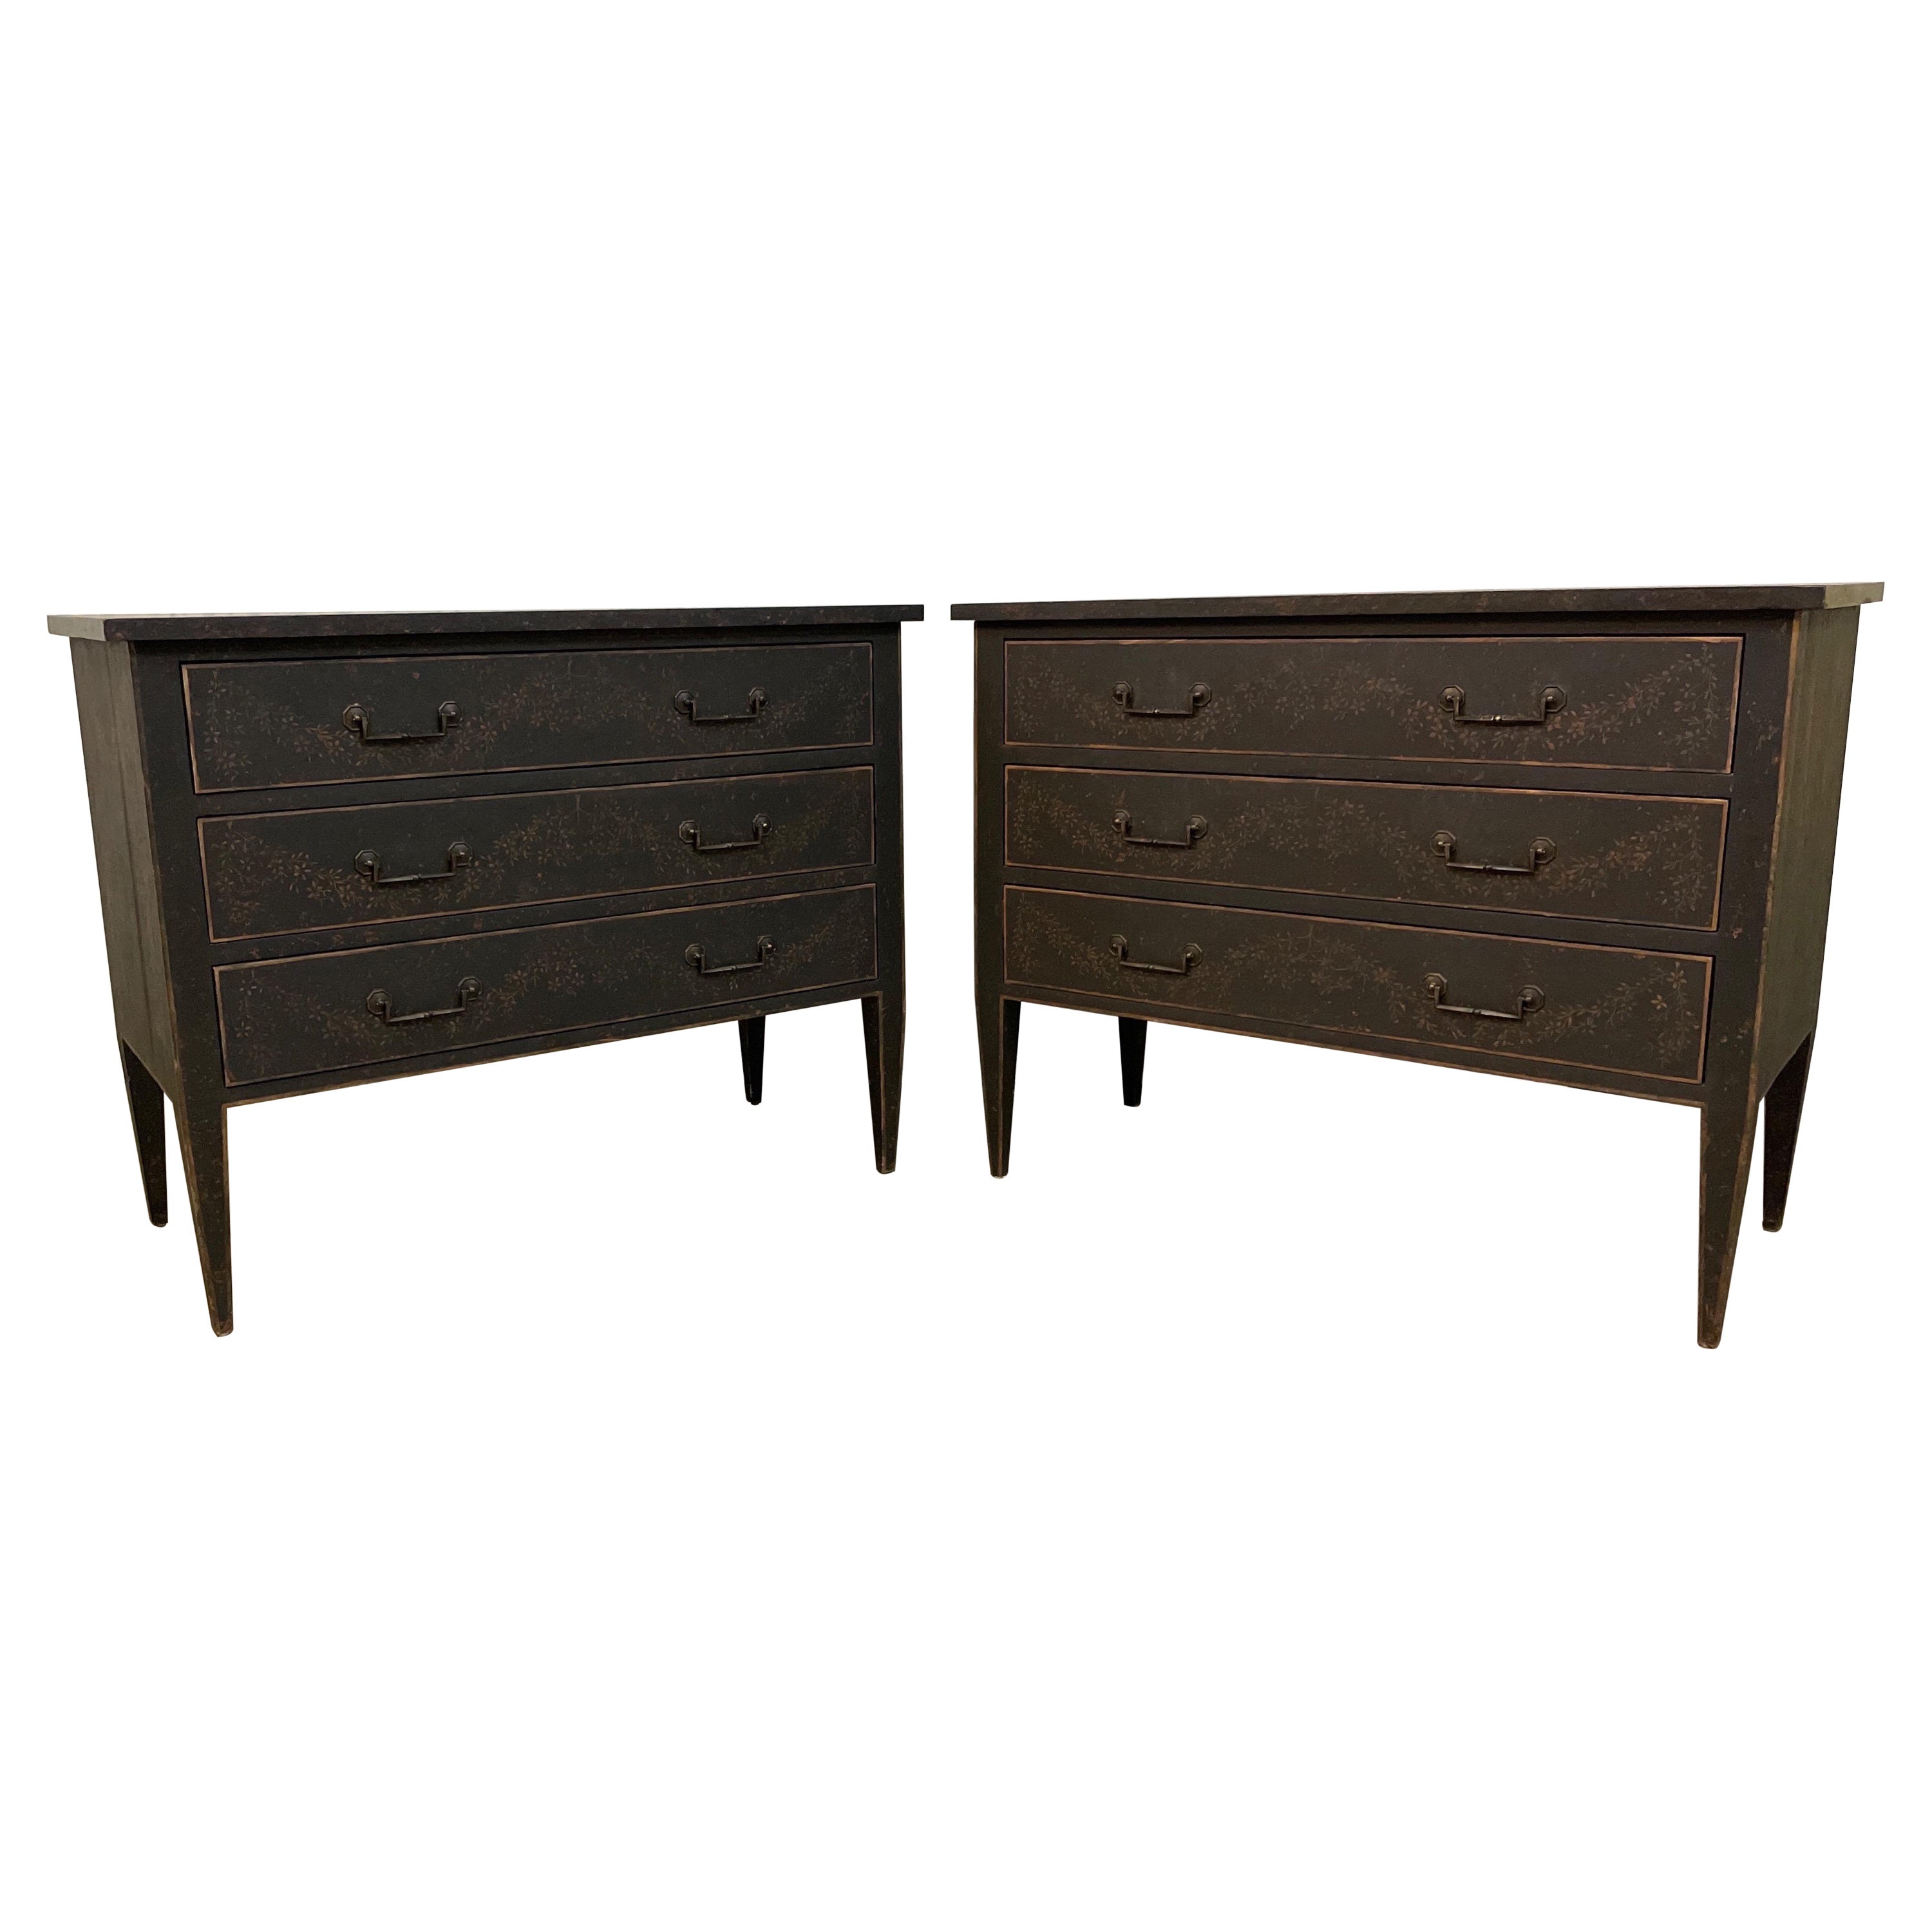 Pair of Neoclassical Faux Painted Commodes by Nierman Weeks